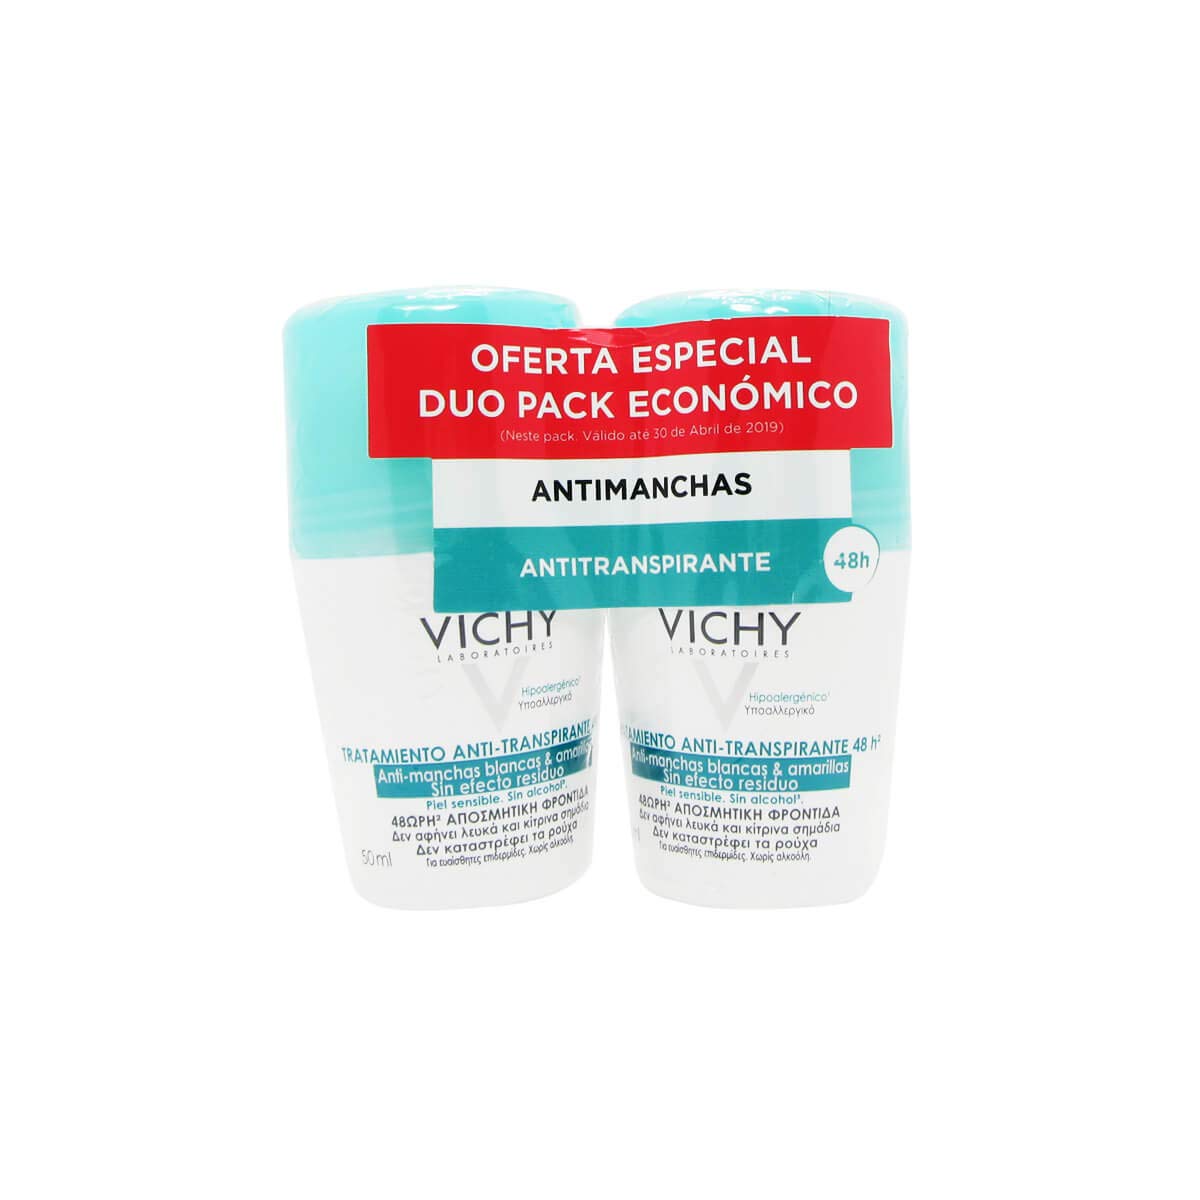 Vichy Intensive perspiration deodorant no stains 2 x 50 ml